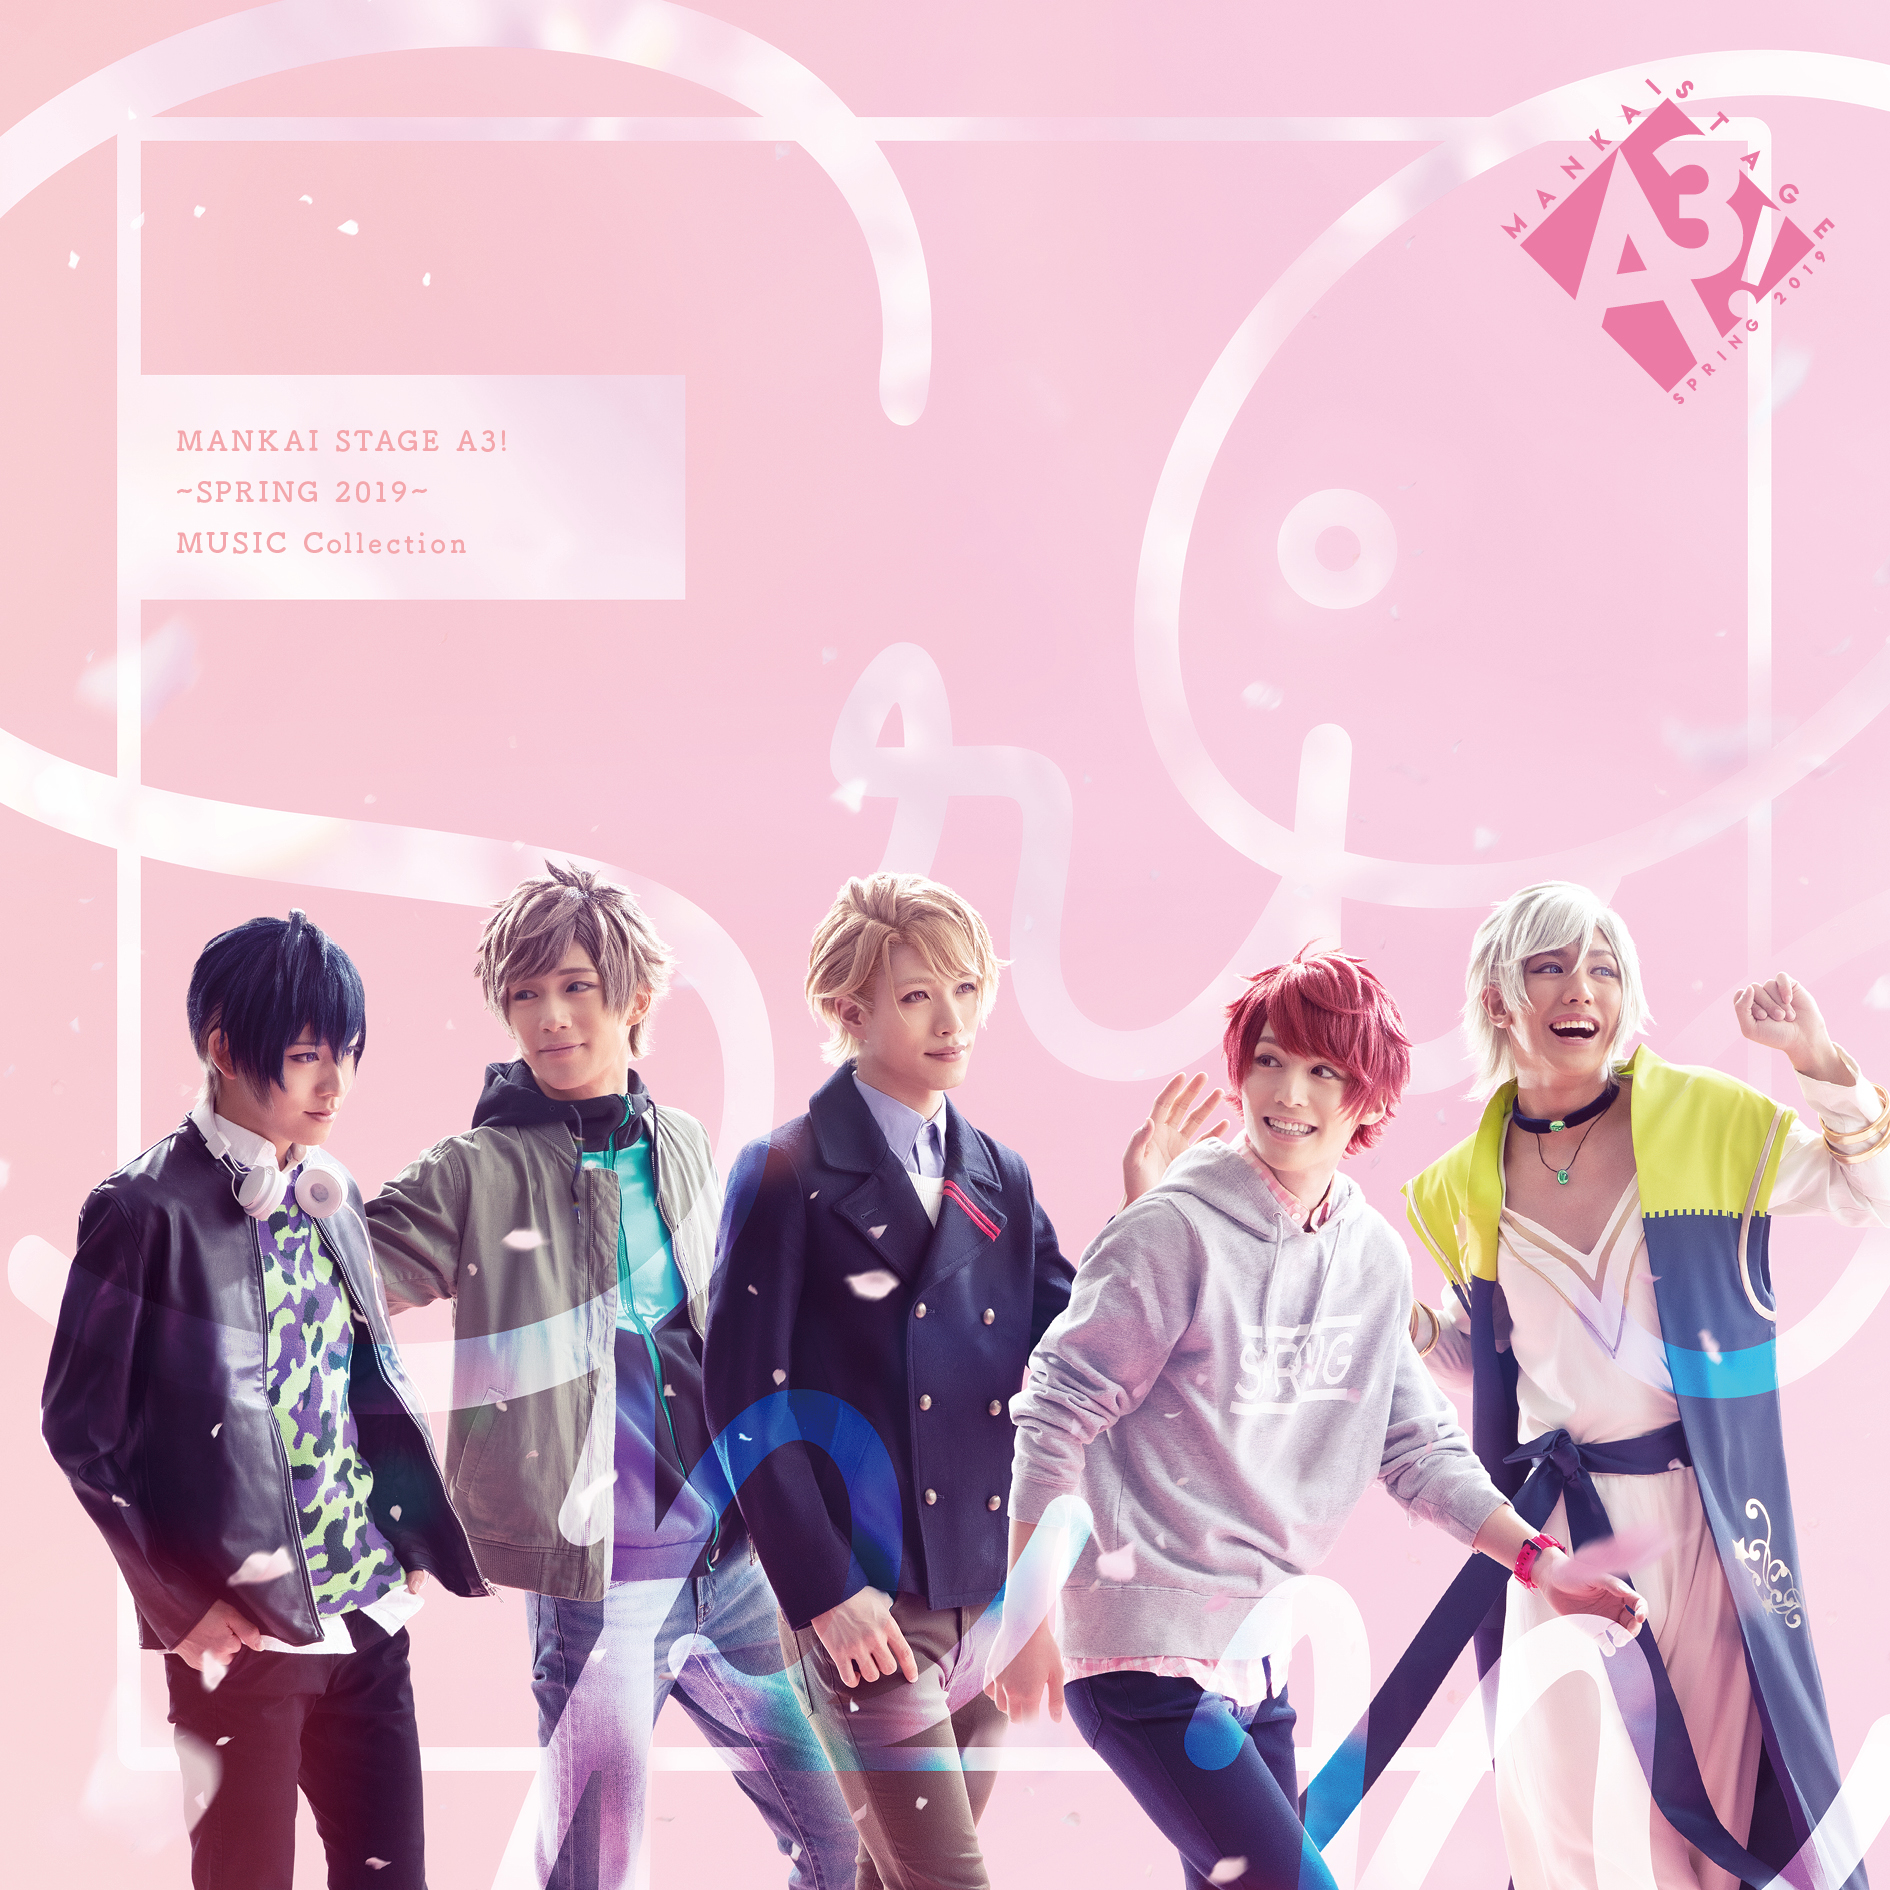 【MANKAI STAGE A3!】MANKAI STAGE”A3!”〜SPRING 2019〜 MUSIC Collection(CD only)